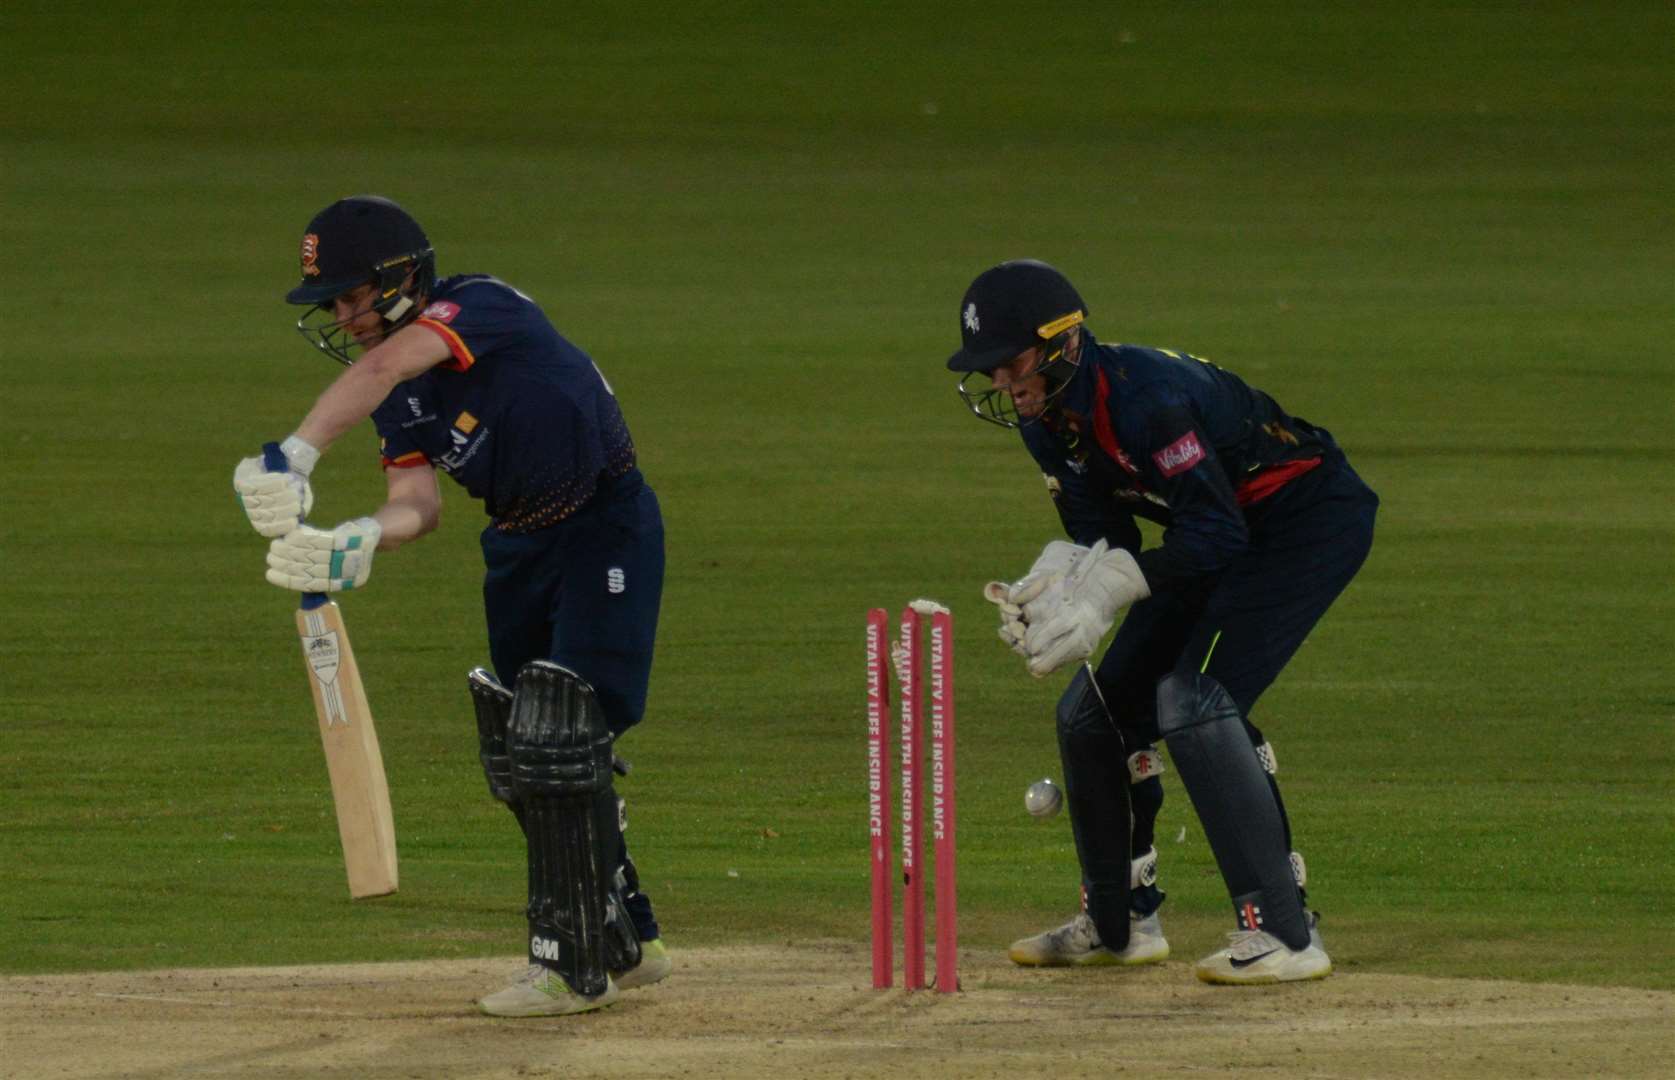 Kent Captain Sam Billings gets a close view of the dismissal of Essex Eagles opener Adam Wheater. Picture: Chris Davey.